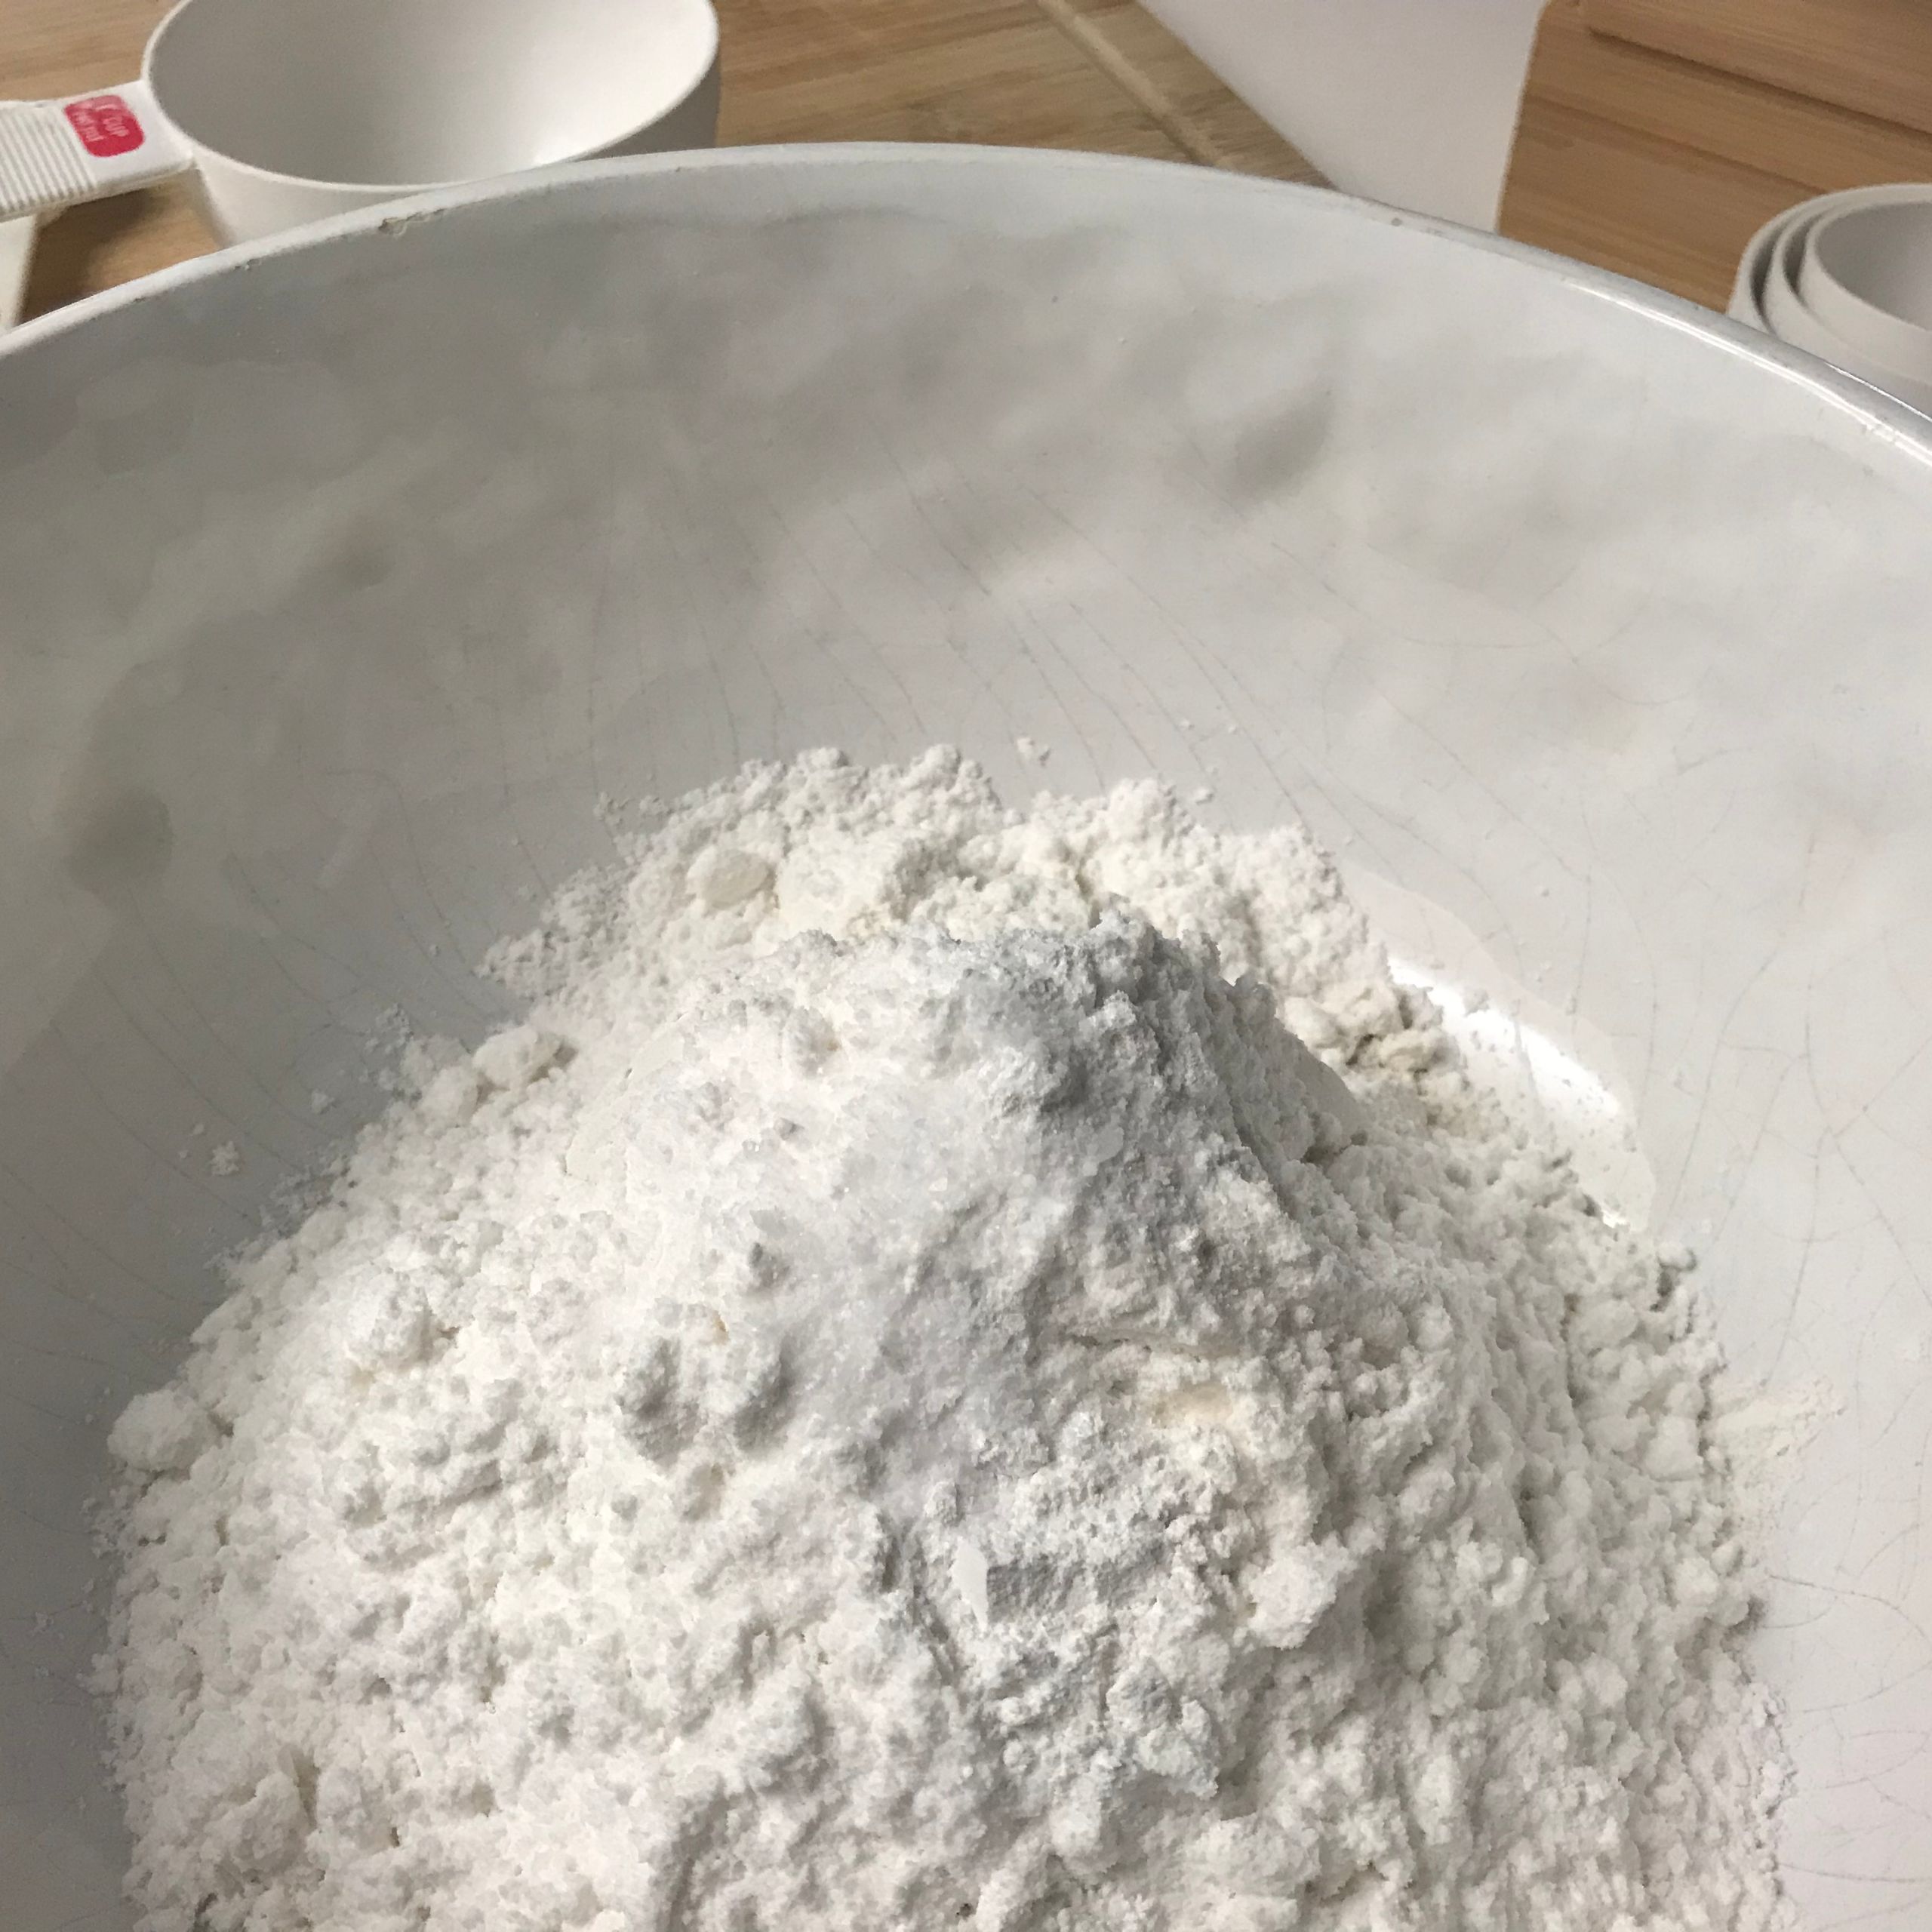 ingredients for dough in a bowl